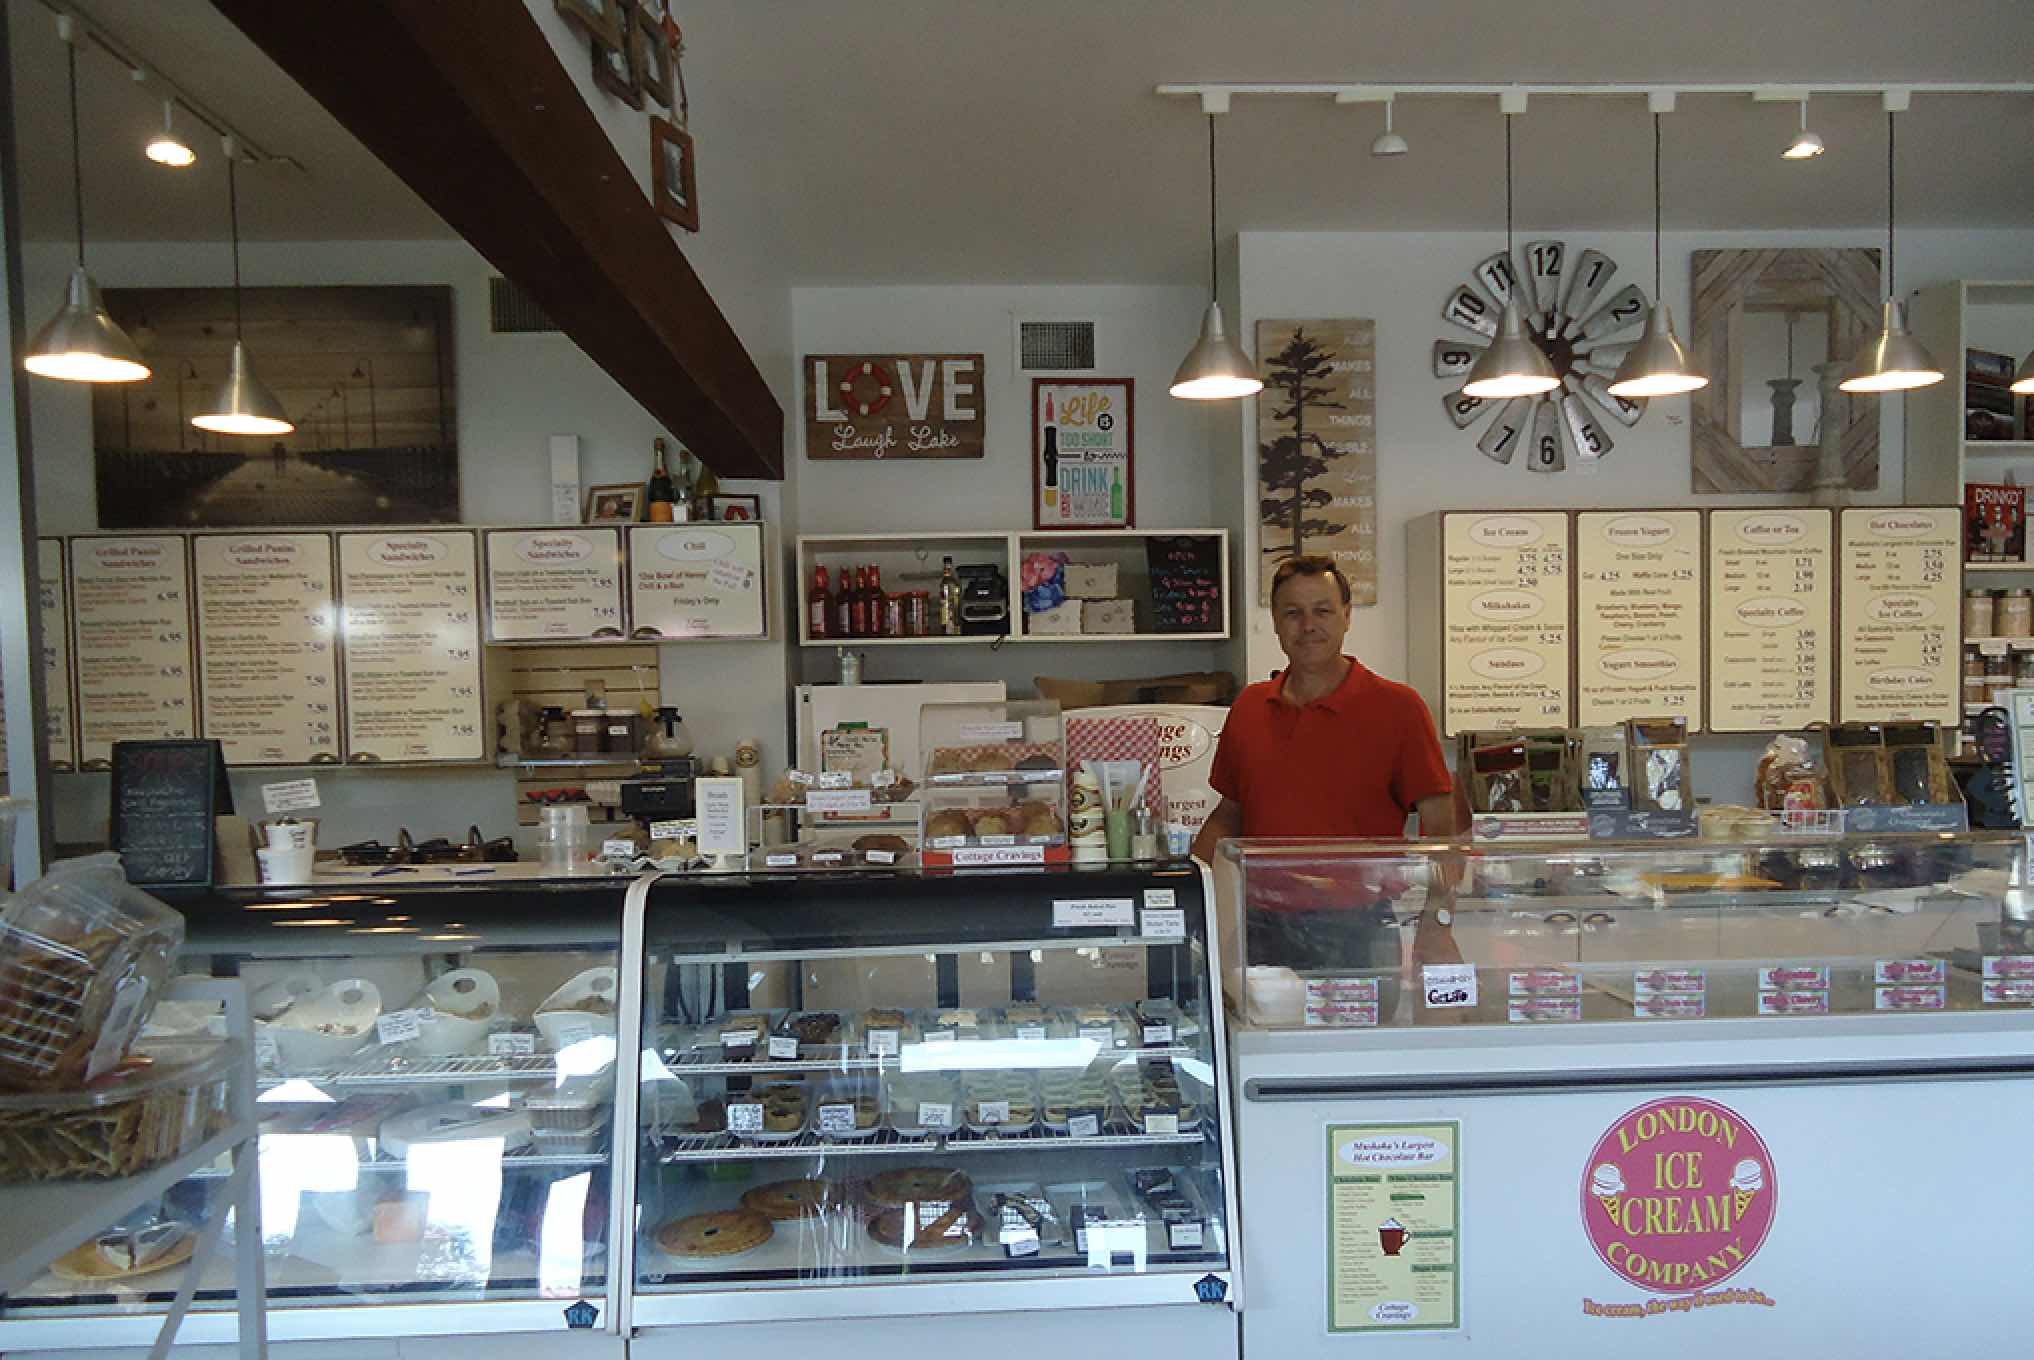 Cottage Cravings in Bala offer sweet treats and more